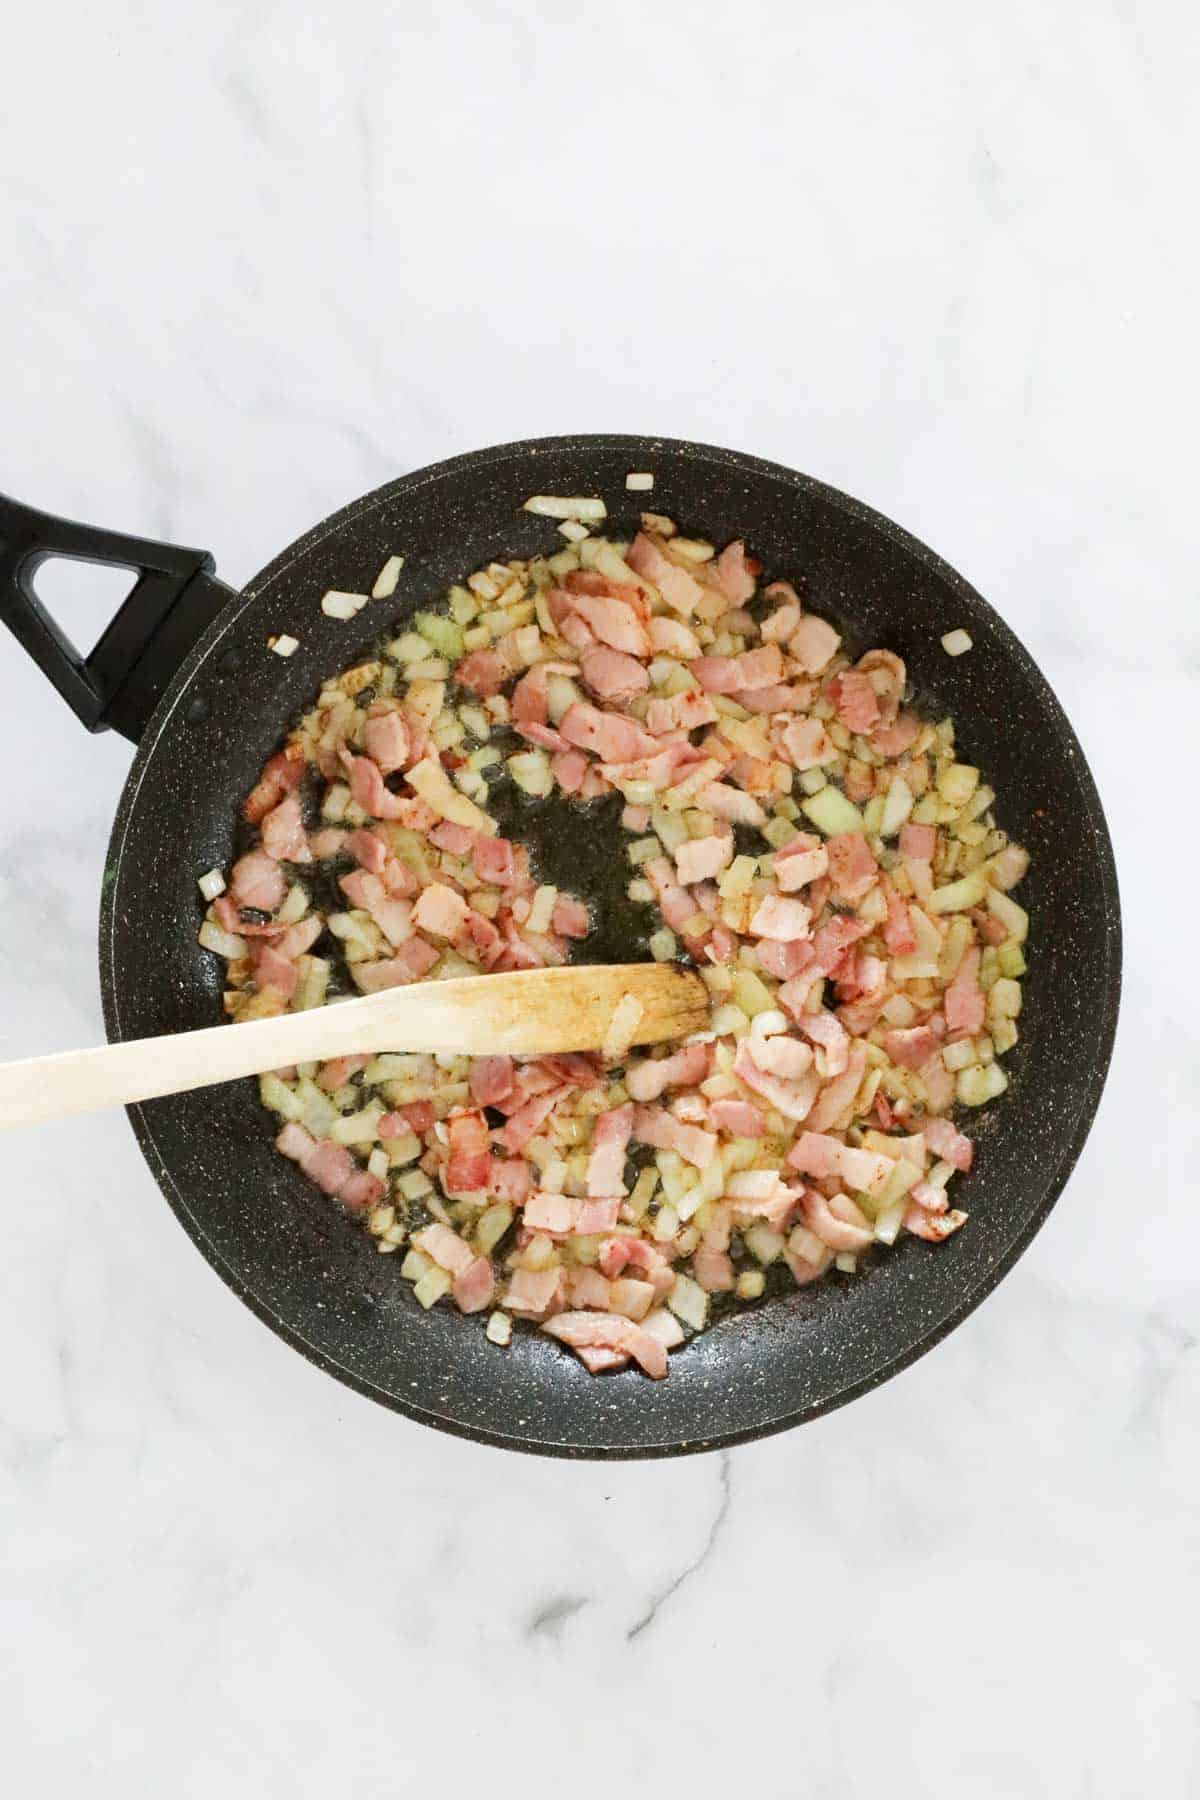 Diced bacon and onion in a large frying pan.